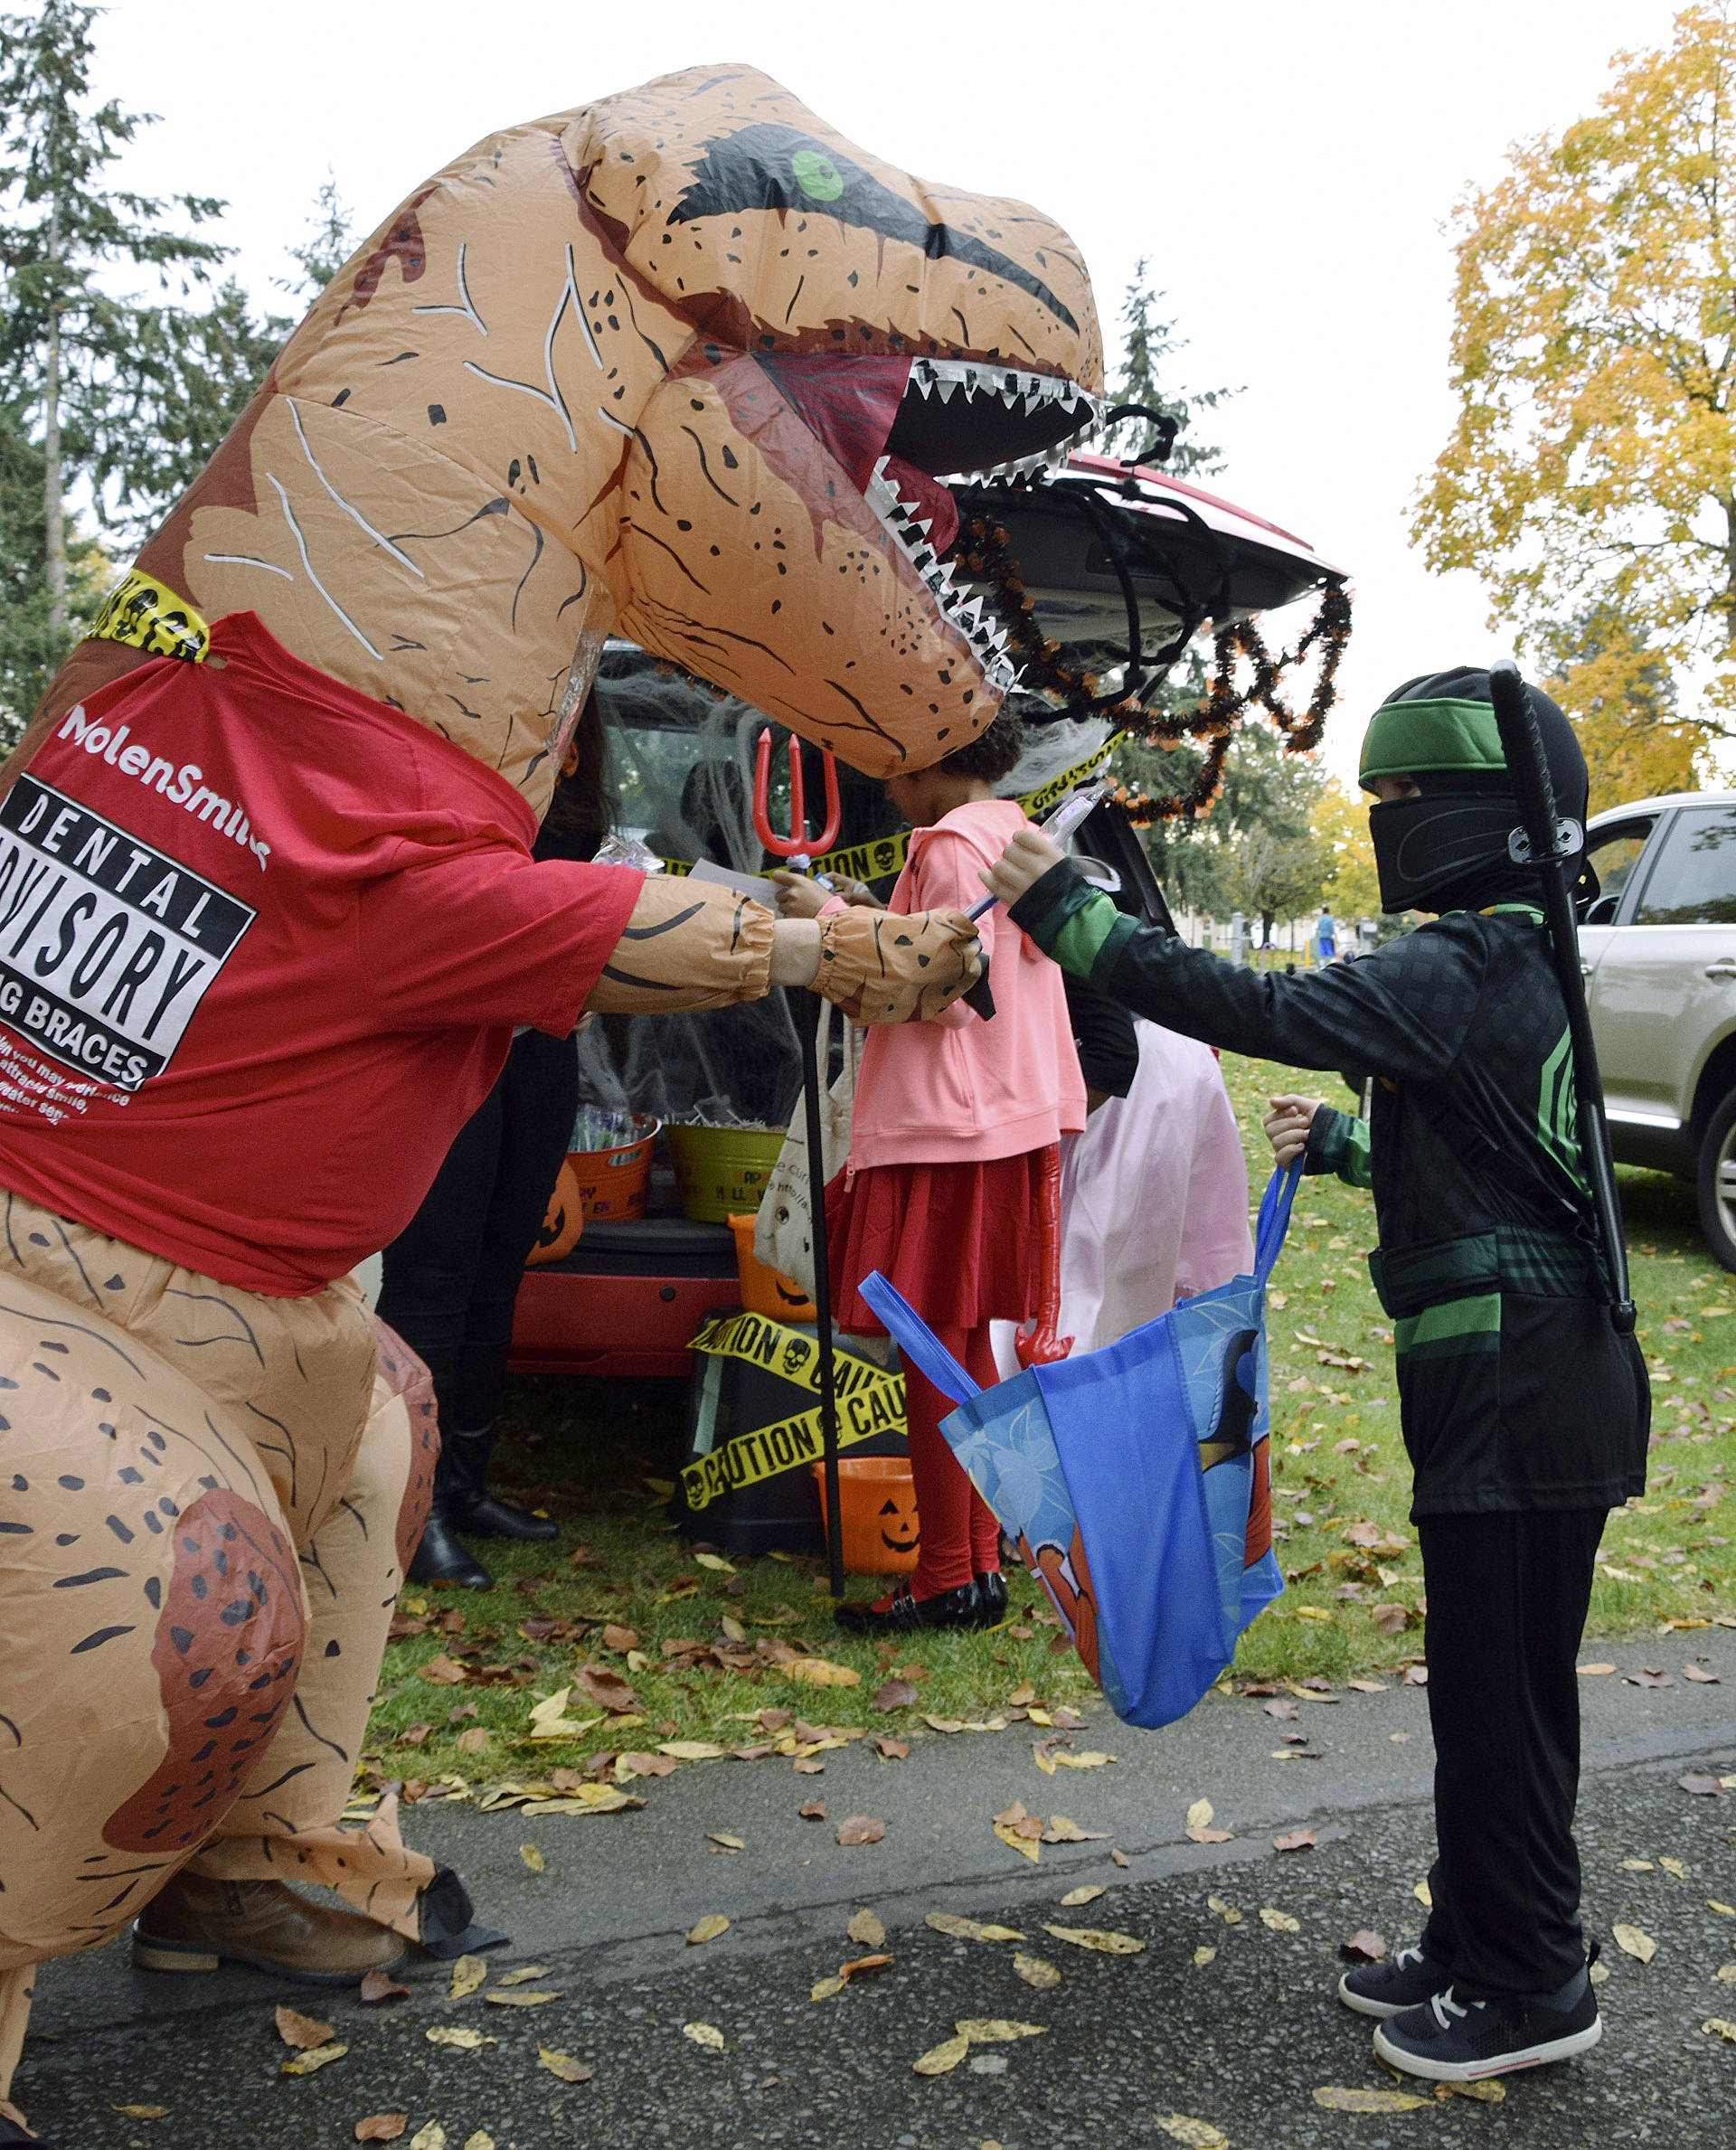 Left, Sebastian Bane, 5, gets a toothbrush from T-Rex. Right, Krystal Sanders as a pirate has Shaylee Bonzan, 9, and Landon Gregory, 7, pluck candy from the treasure chest.